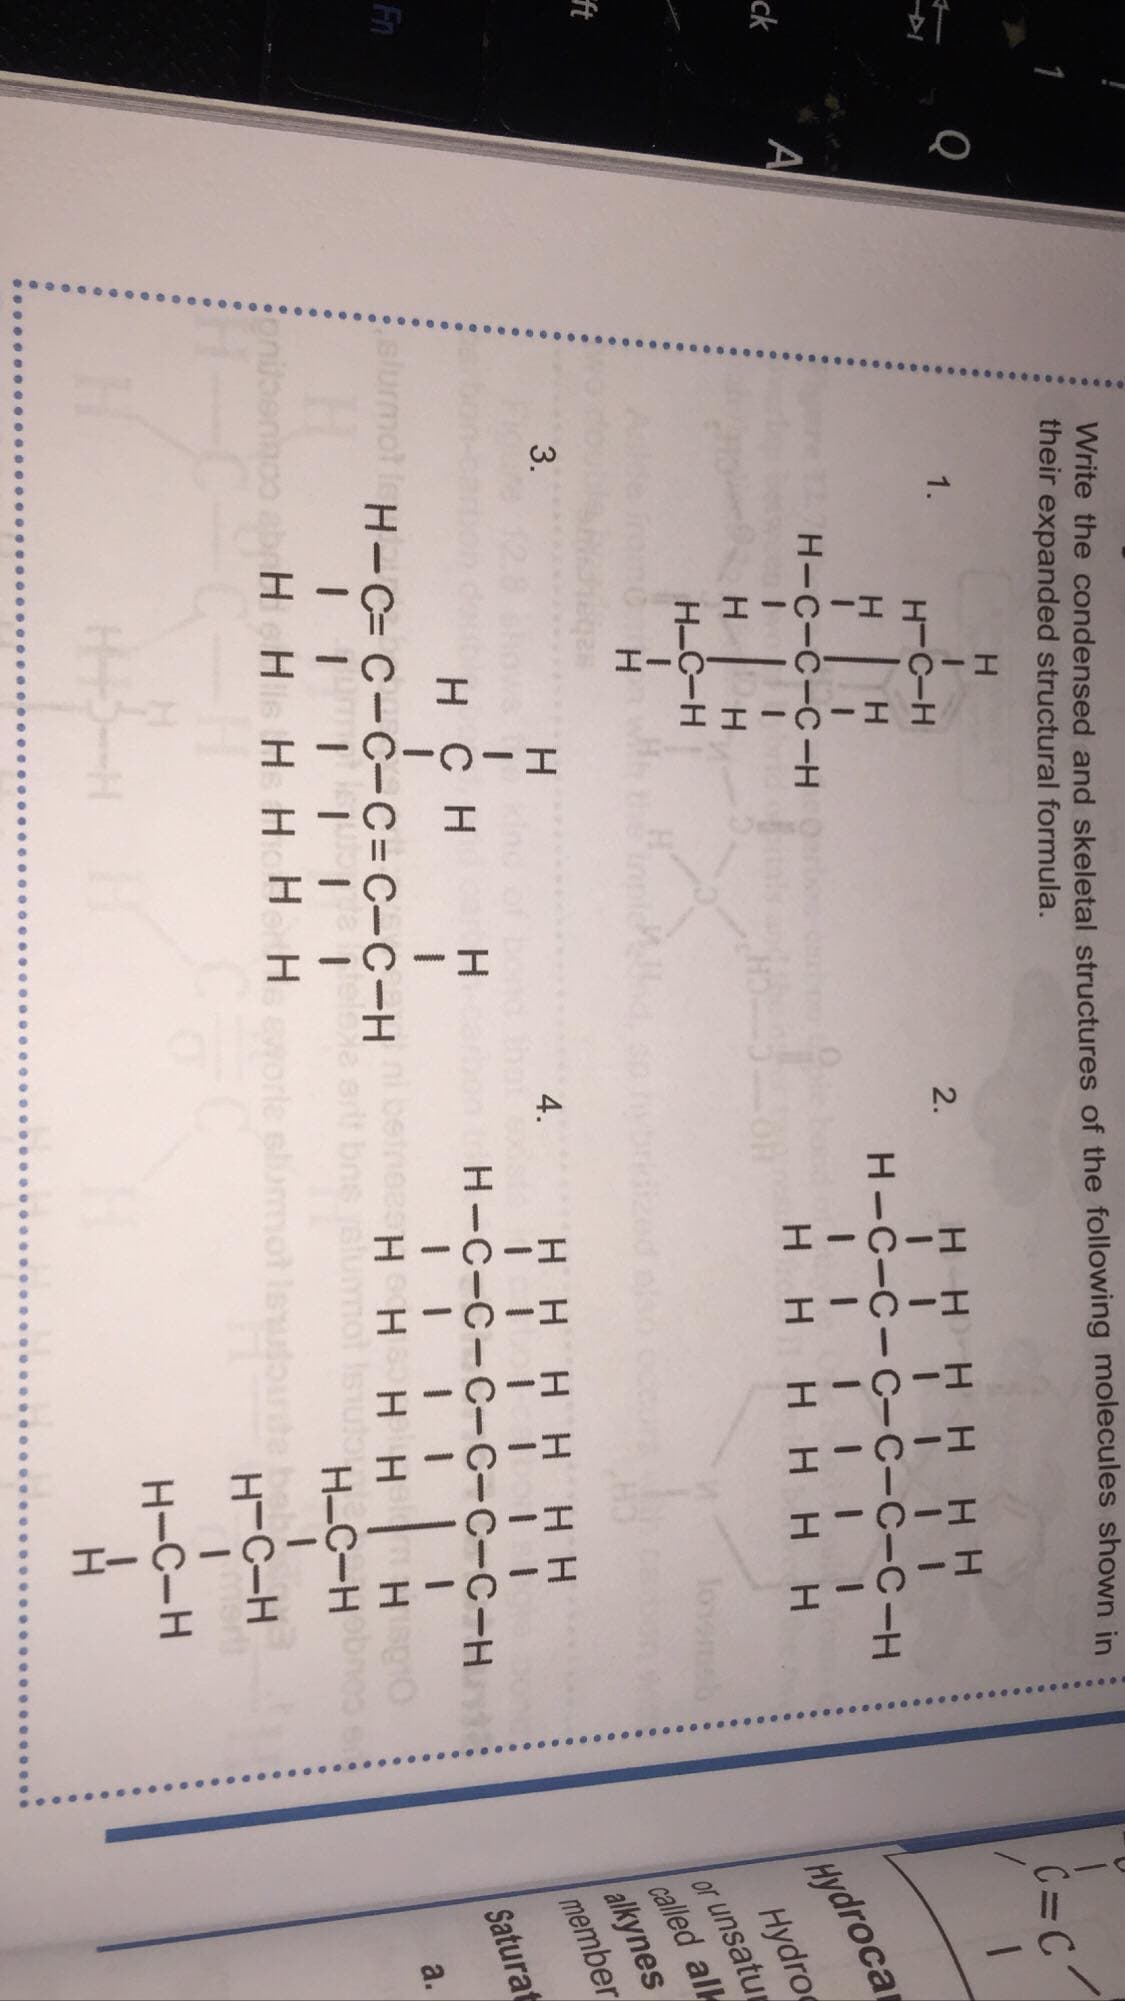 3.
HI
Write the condensed and skeletal structures of the following molecules shown in
their expanded structural formula.
Q
1.
C=C
H-C-H
2.
HH
I I I I | I
H-C-C-C-C-C-C-H
| | | | | |
нннн нн
HHH
H.
H.
A
H-C-C-C-H
ck
Hydroca
Hydro
H.
H-C-H
or unsatur
called al
alkynes
member
ft
Tovemeb
H.
4.
HHHH H H
H CH
Blurmot l ni betnee
H
H-C-C-C-C-C-C-H
| | | |
HH H H
alumot
Fn
H-C= C-C-C= C-C-H
Saturat
a.
art bne
HHis H H H Horle sliomot
Conilbeninoo
H-C-H o e
H-C-H
H-C-H
